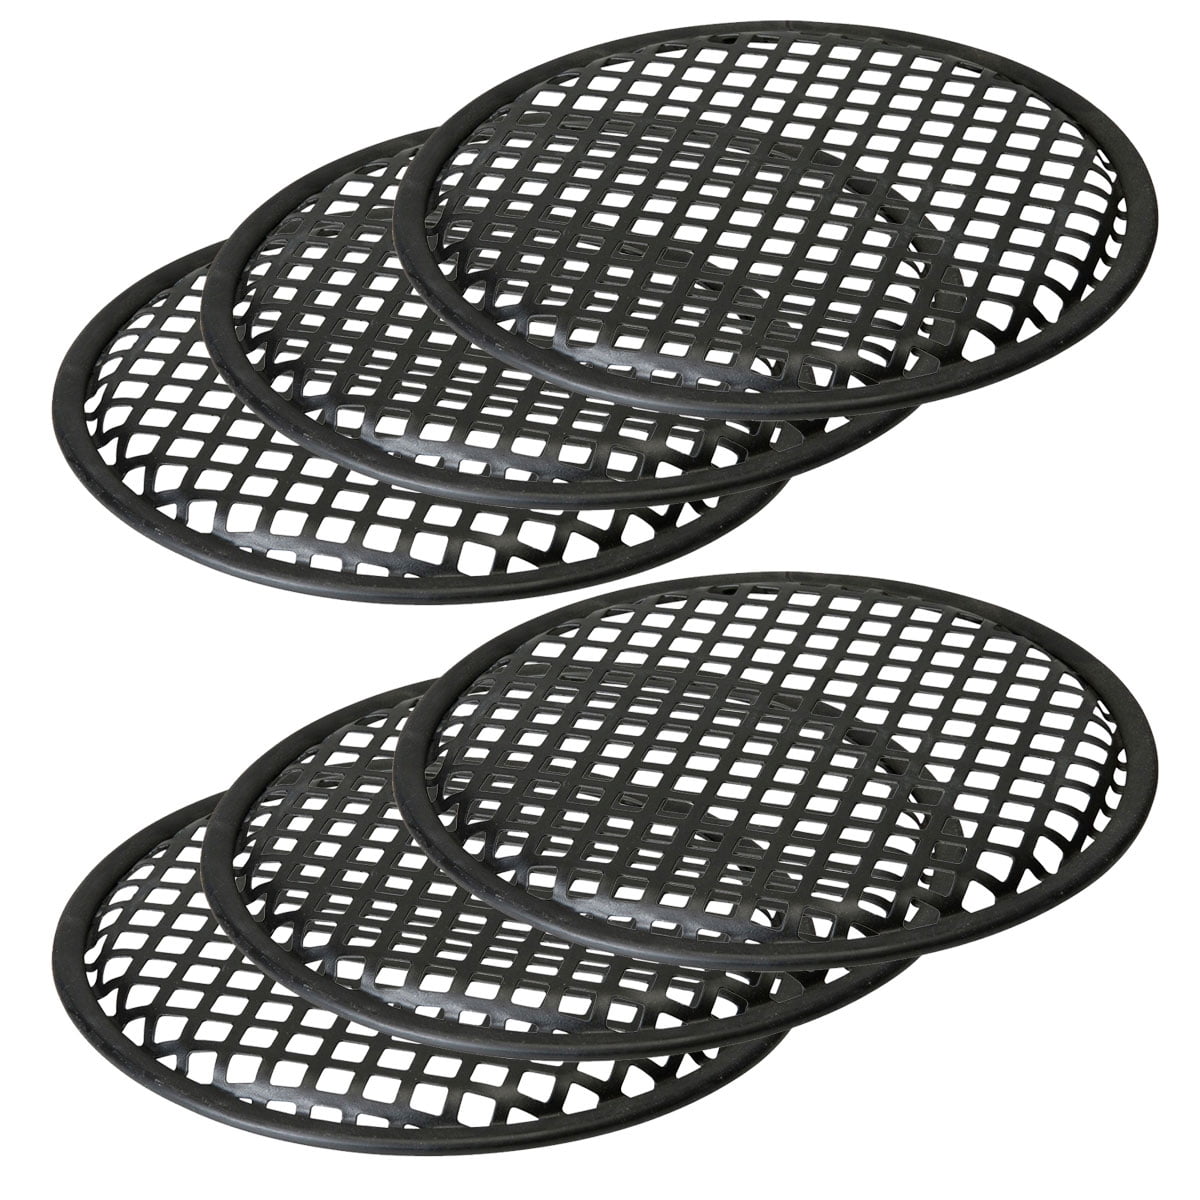 2X Black PLASTIC 8" inch Sub Woofer Speaker WAFFLE GRILL Protective Cover VWLTW 